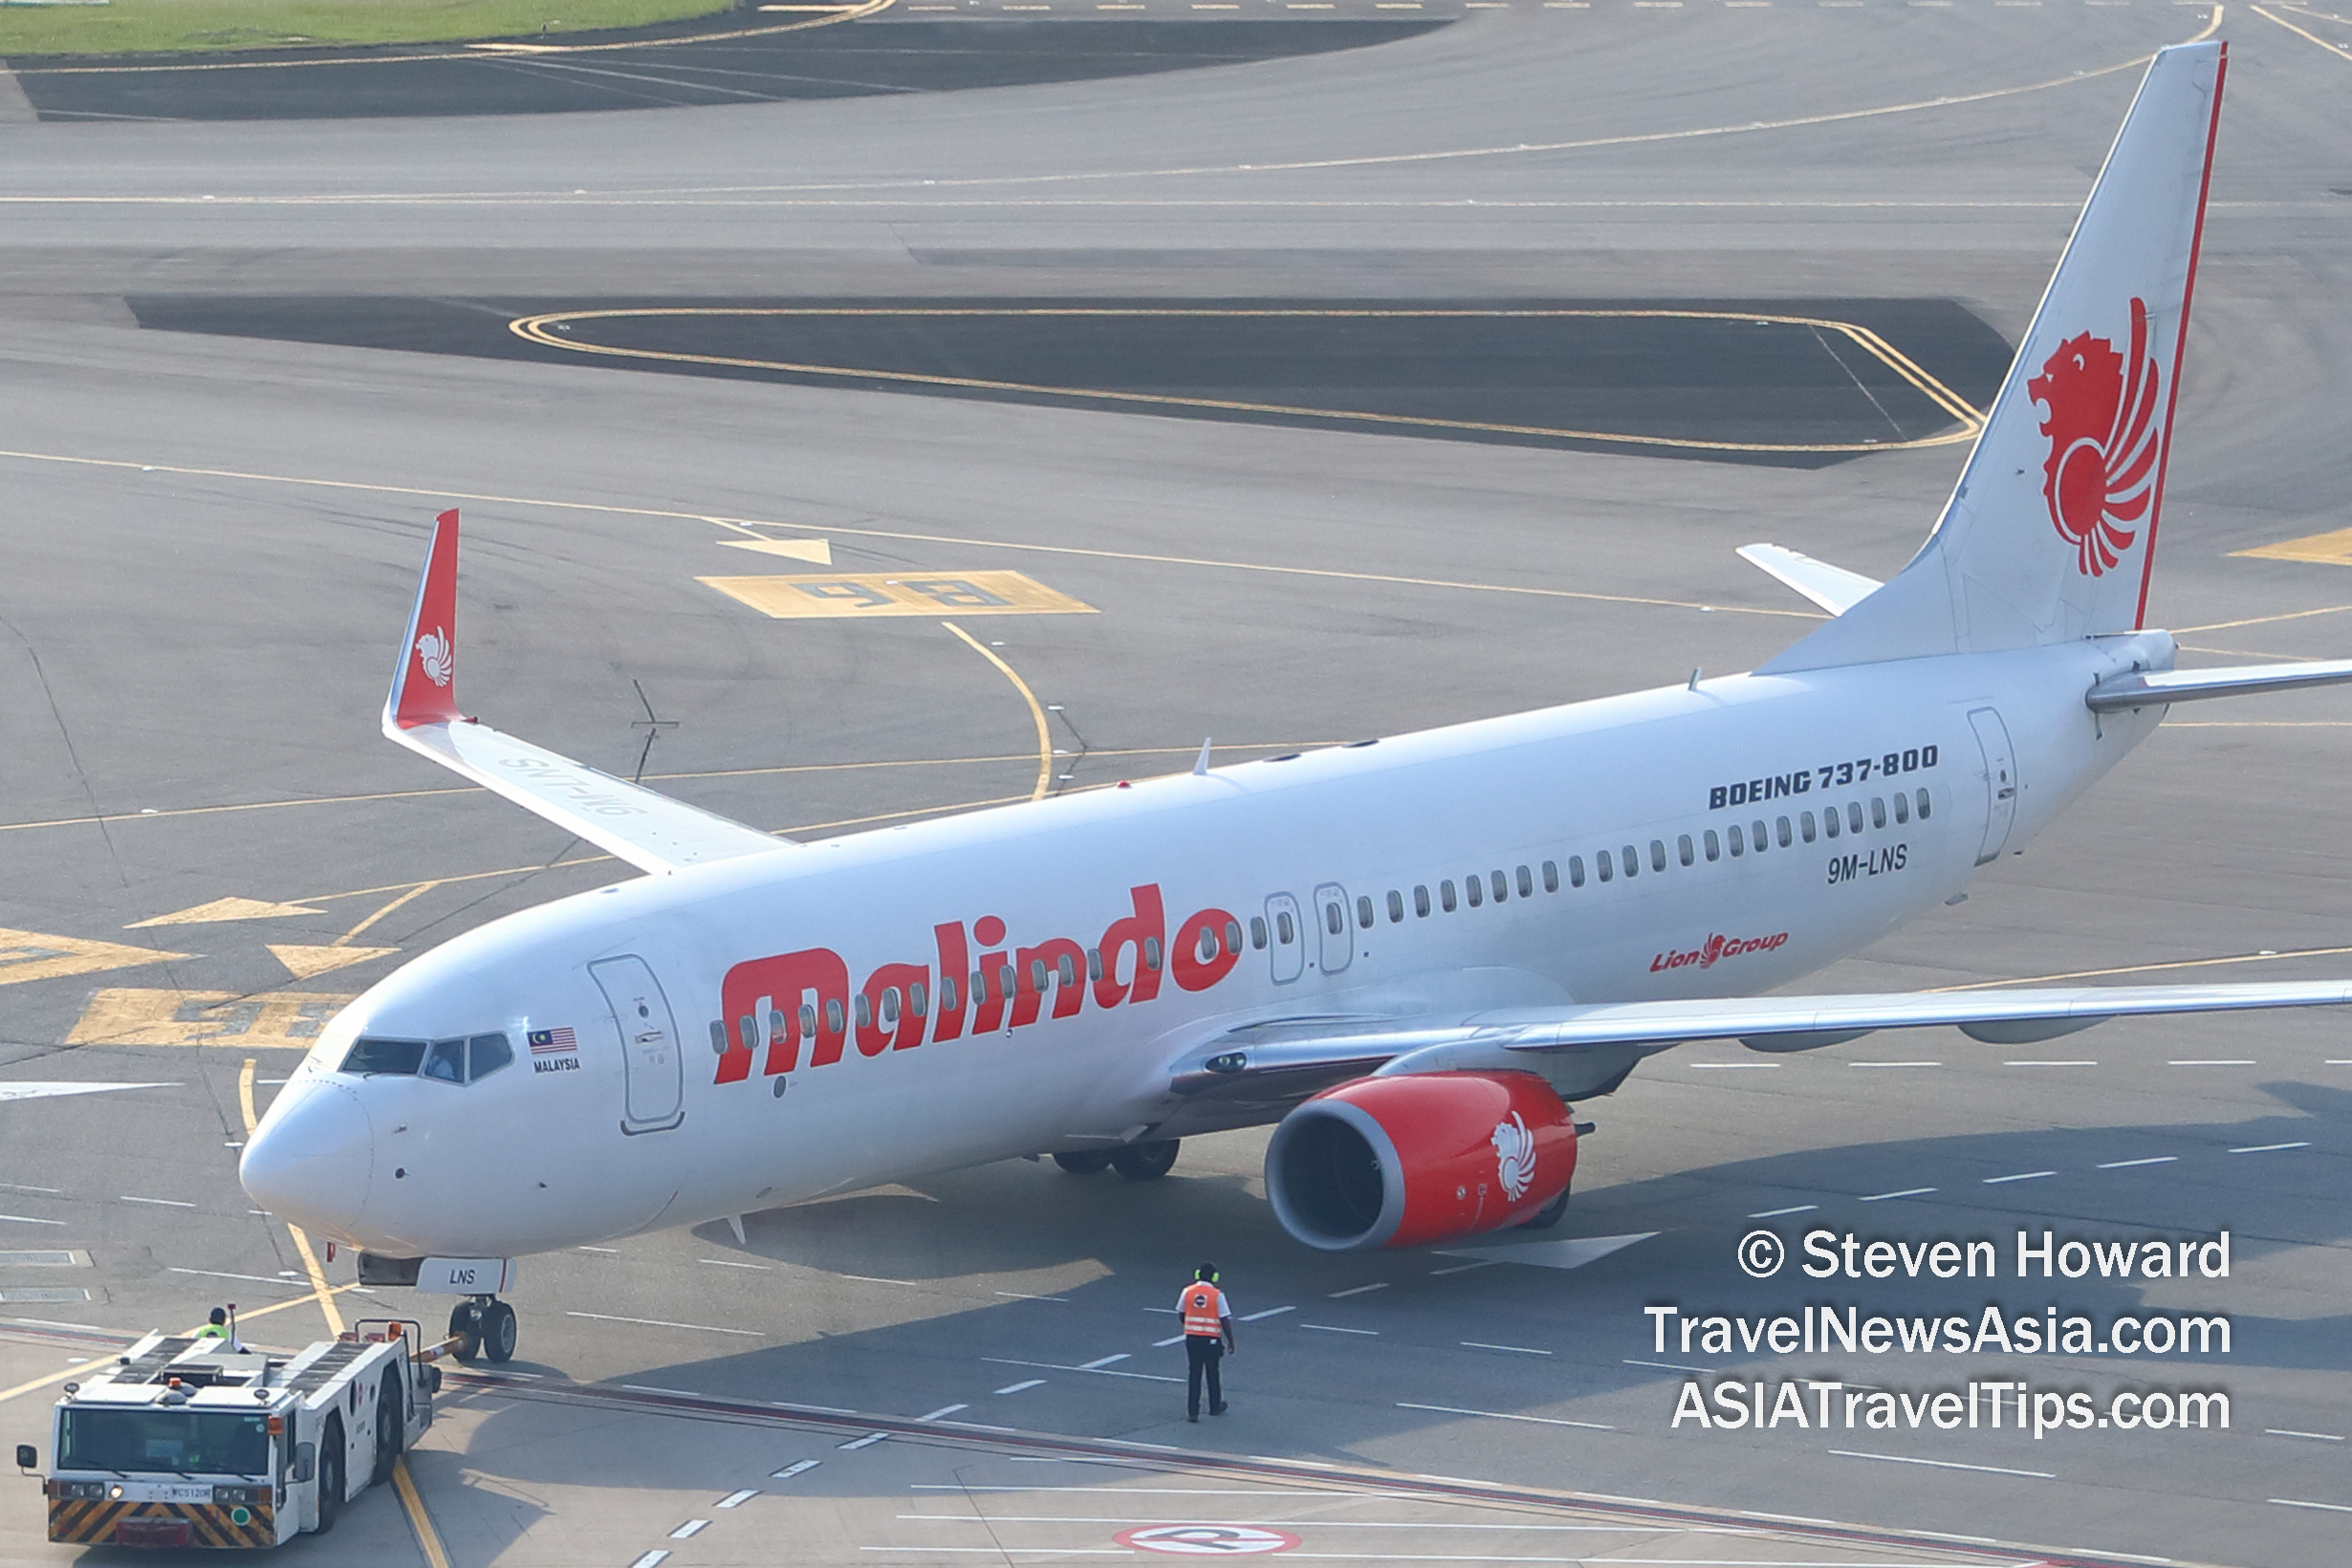 Malindo Air Boeing 737-800 reg: 9M-LNS at Changi Airport in Singapore. Picture by Steven Howard of TravelNewsAsia.com Click to enlarge.